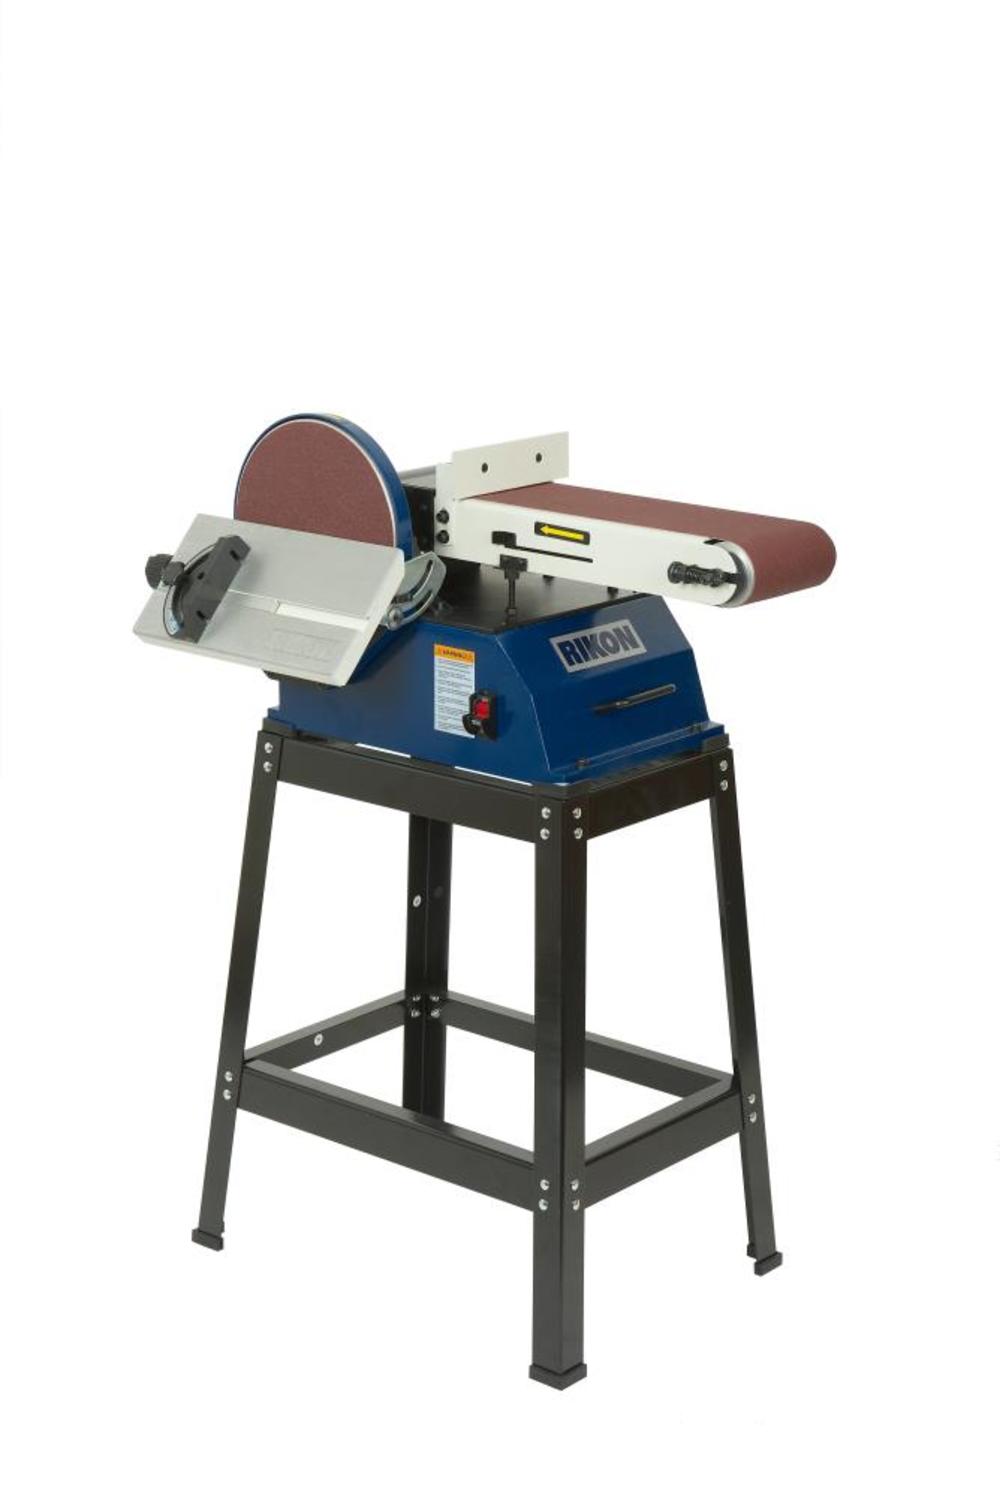 Rikon 6in x 48in Belt /10in Disc Sander with Stand -  50-122